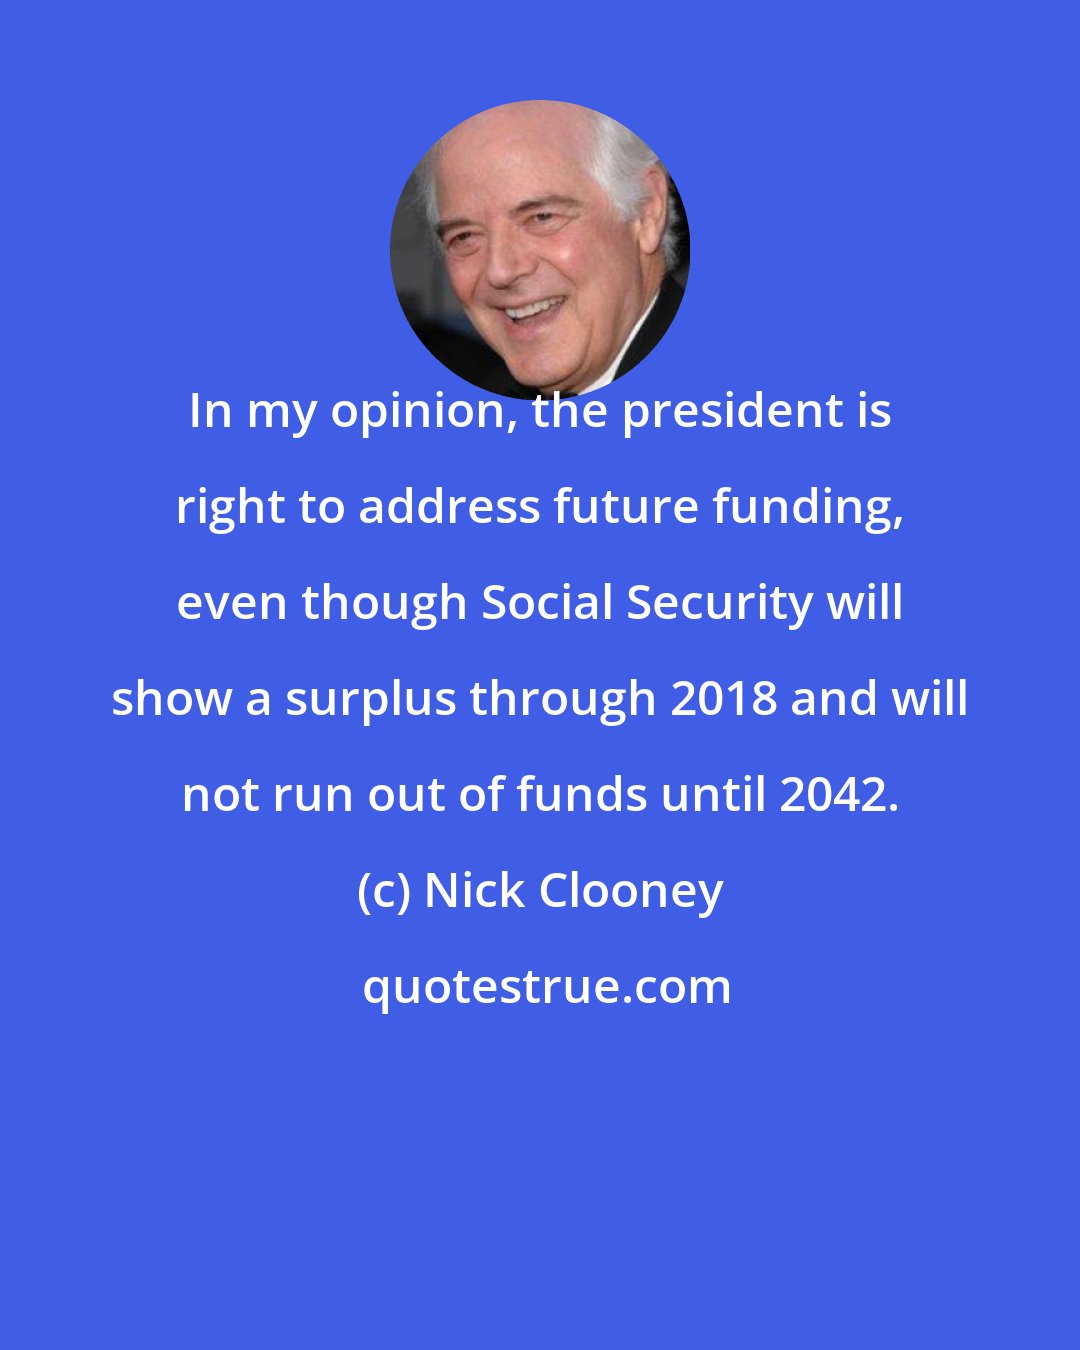 Nick Clooney: In my opinion, the president is right to address future funding, even though Social Security will show a surplus through 2018 and will not run out of funds until 2042.